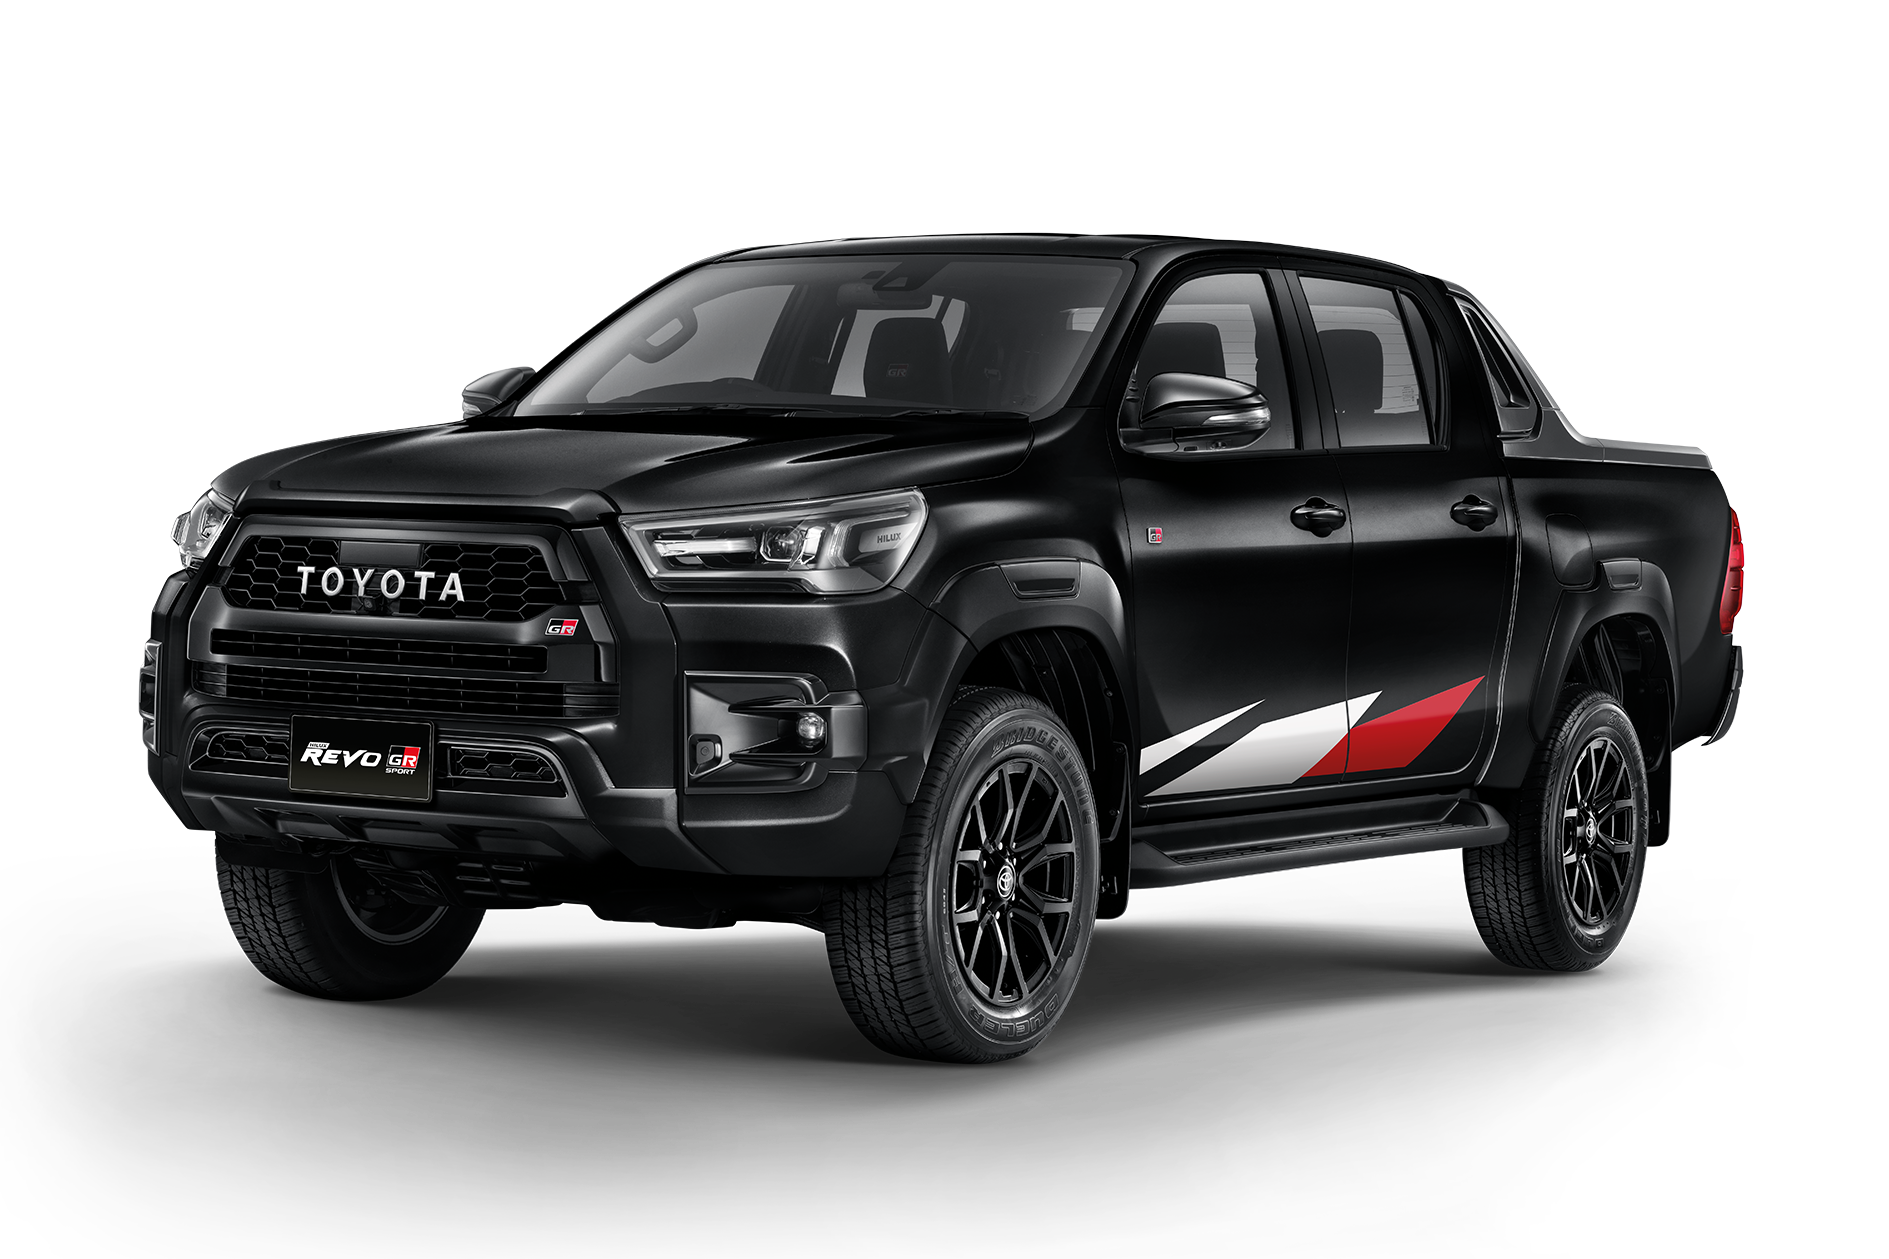 2022 Toyota Hilux Gr Sport More Powerful Ute Revealed Carexpert